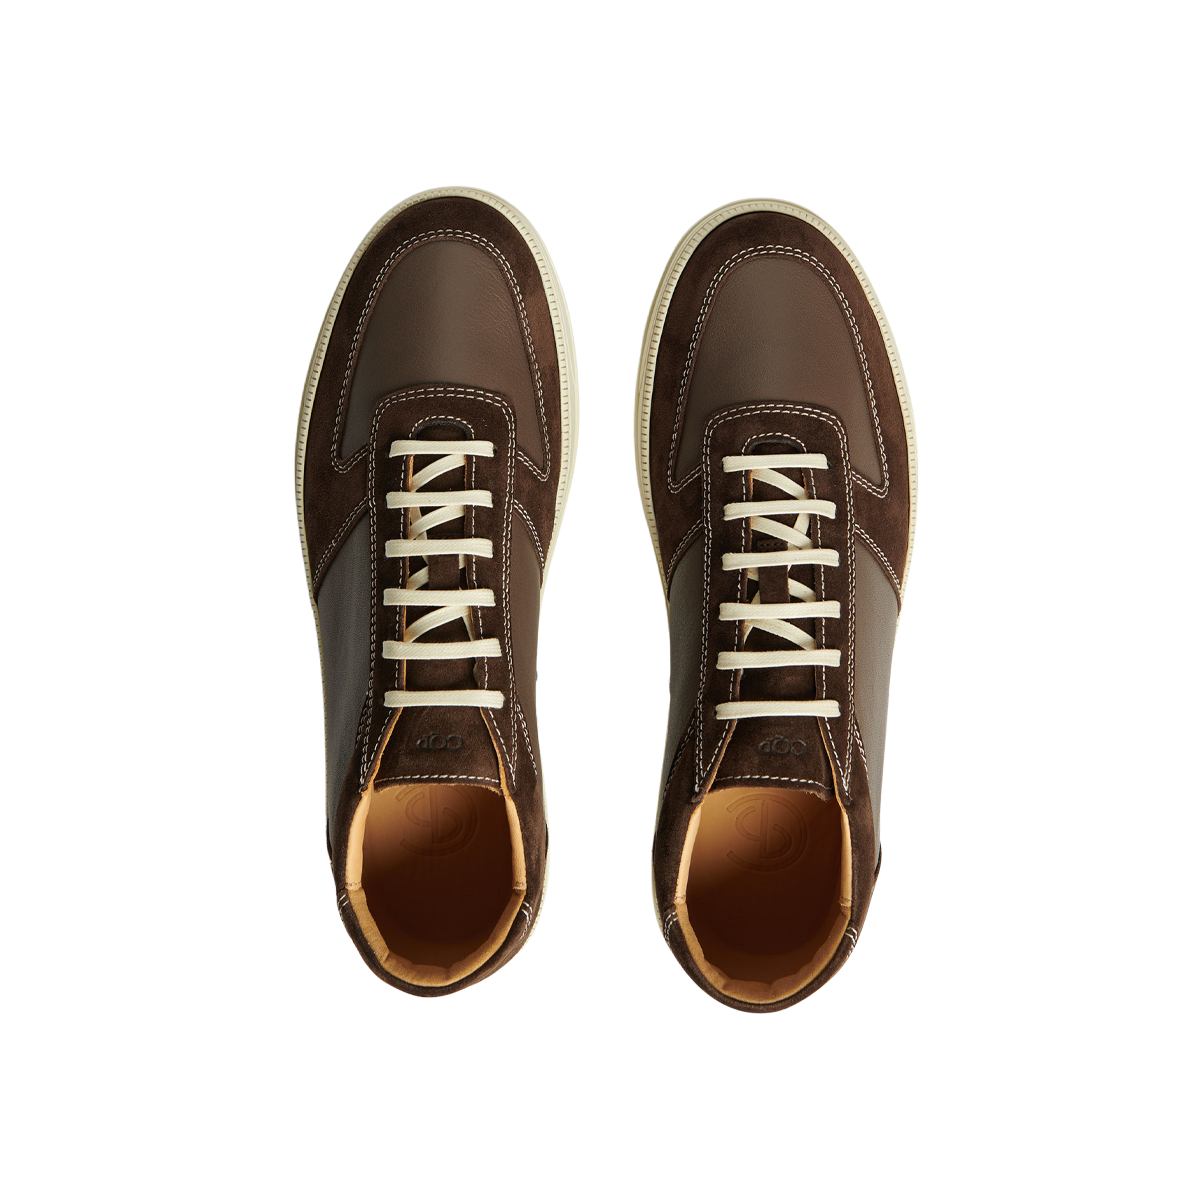 CQP Chocolate Brown Suede Leather Cingo Sneakers Top